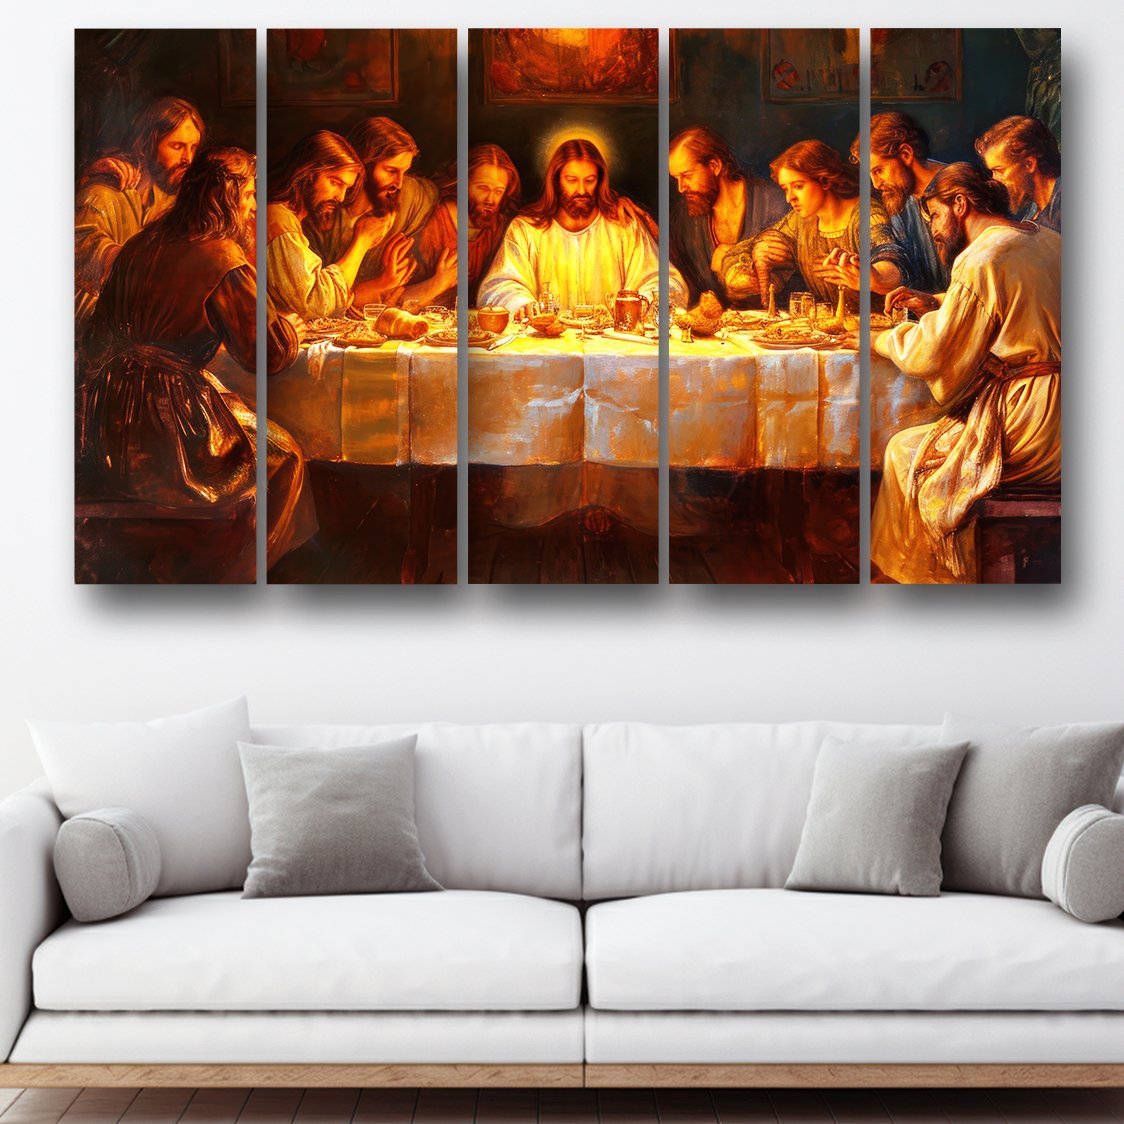 Casperme Lord Jesus Christ Wall Painting For Living Room for Bedroom, Hotels & Office Decoration (48×30 inhes)